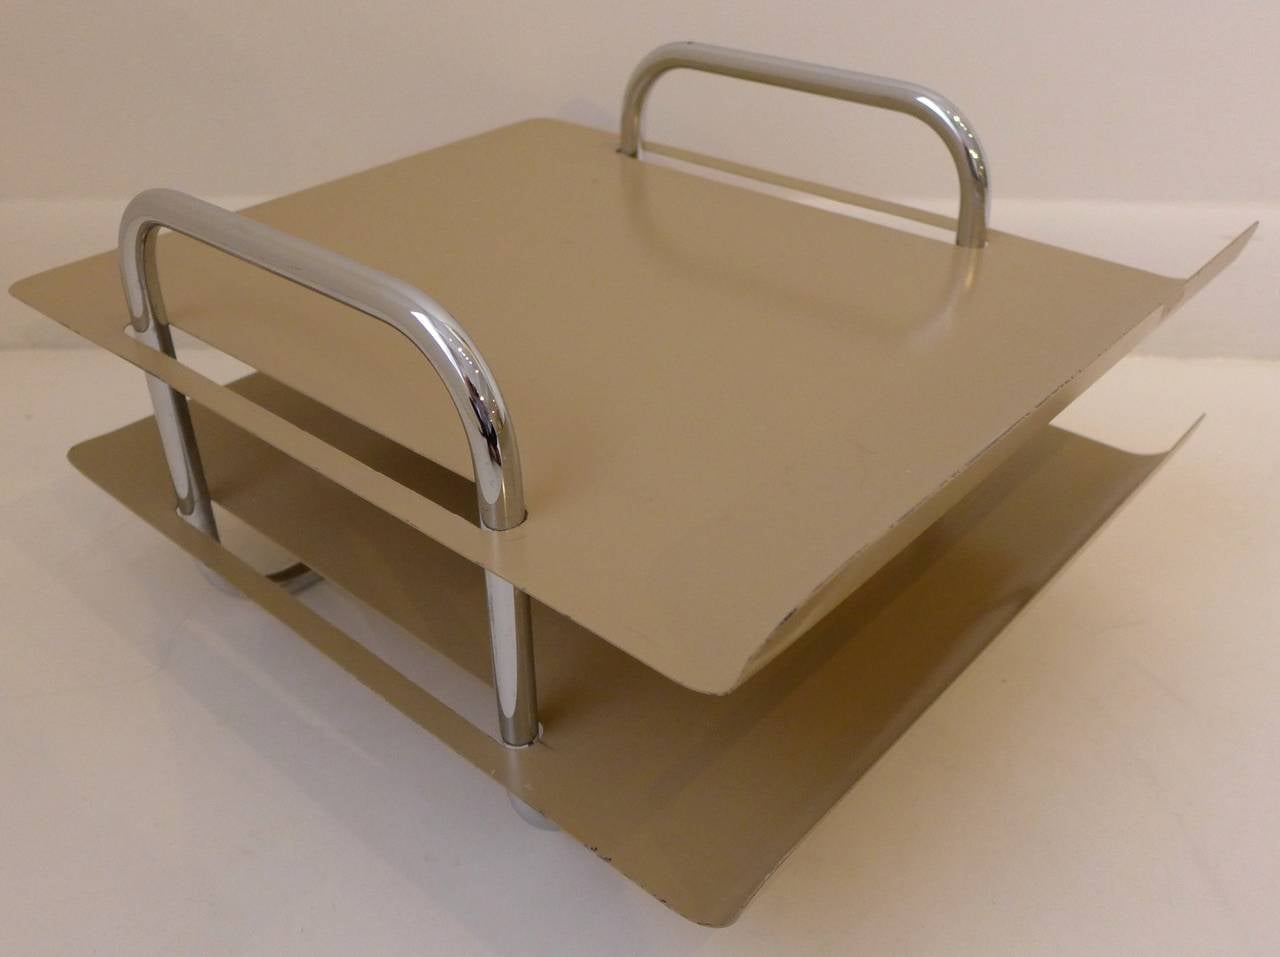 Two-tiered letter tray of tubular chrome and enameled steel, made by Peter Pepper Products of Compton, California, circa 1960s. A seldom-seen design that has an Industrial feel with visual flair. In fine original condition, with some paint loss and